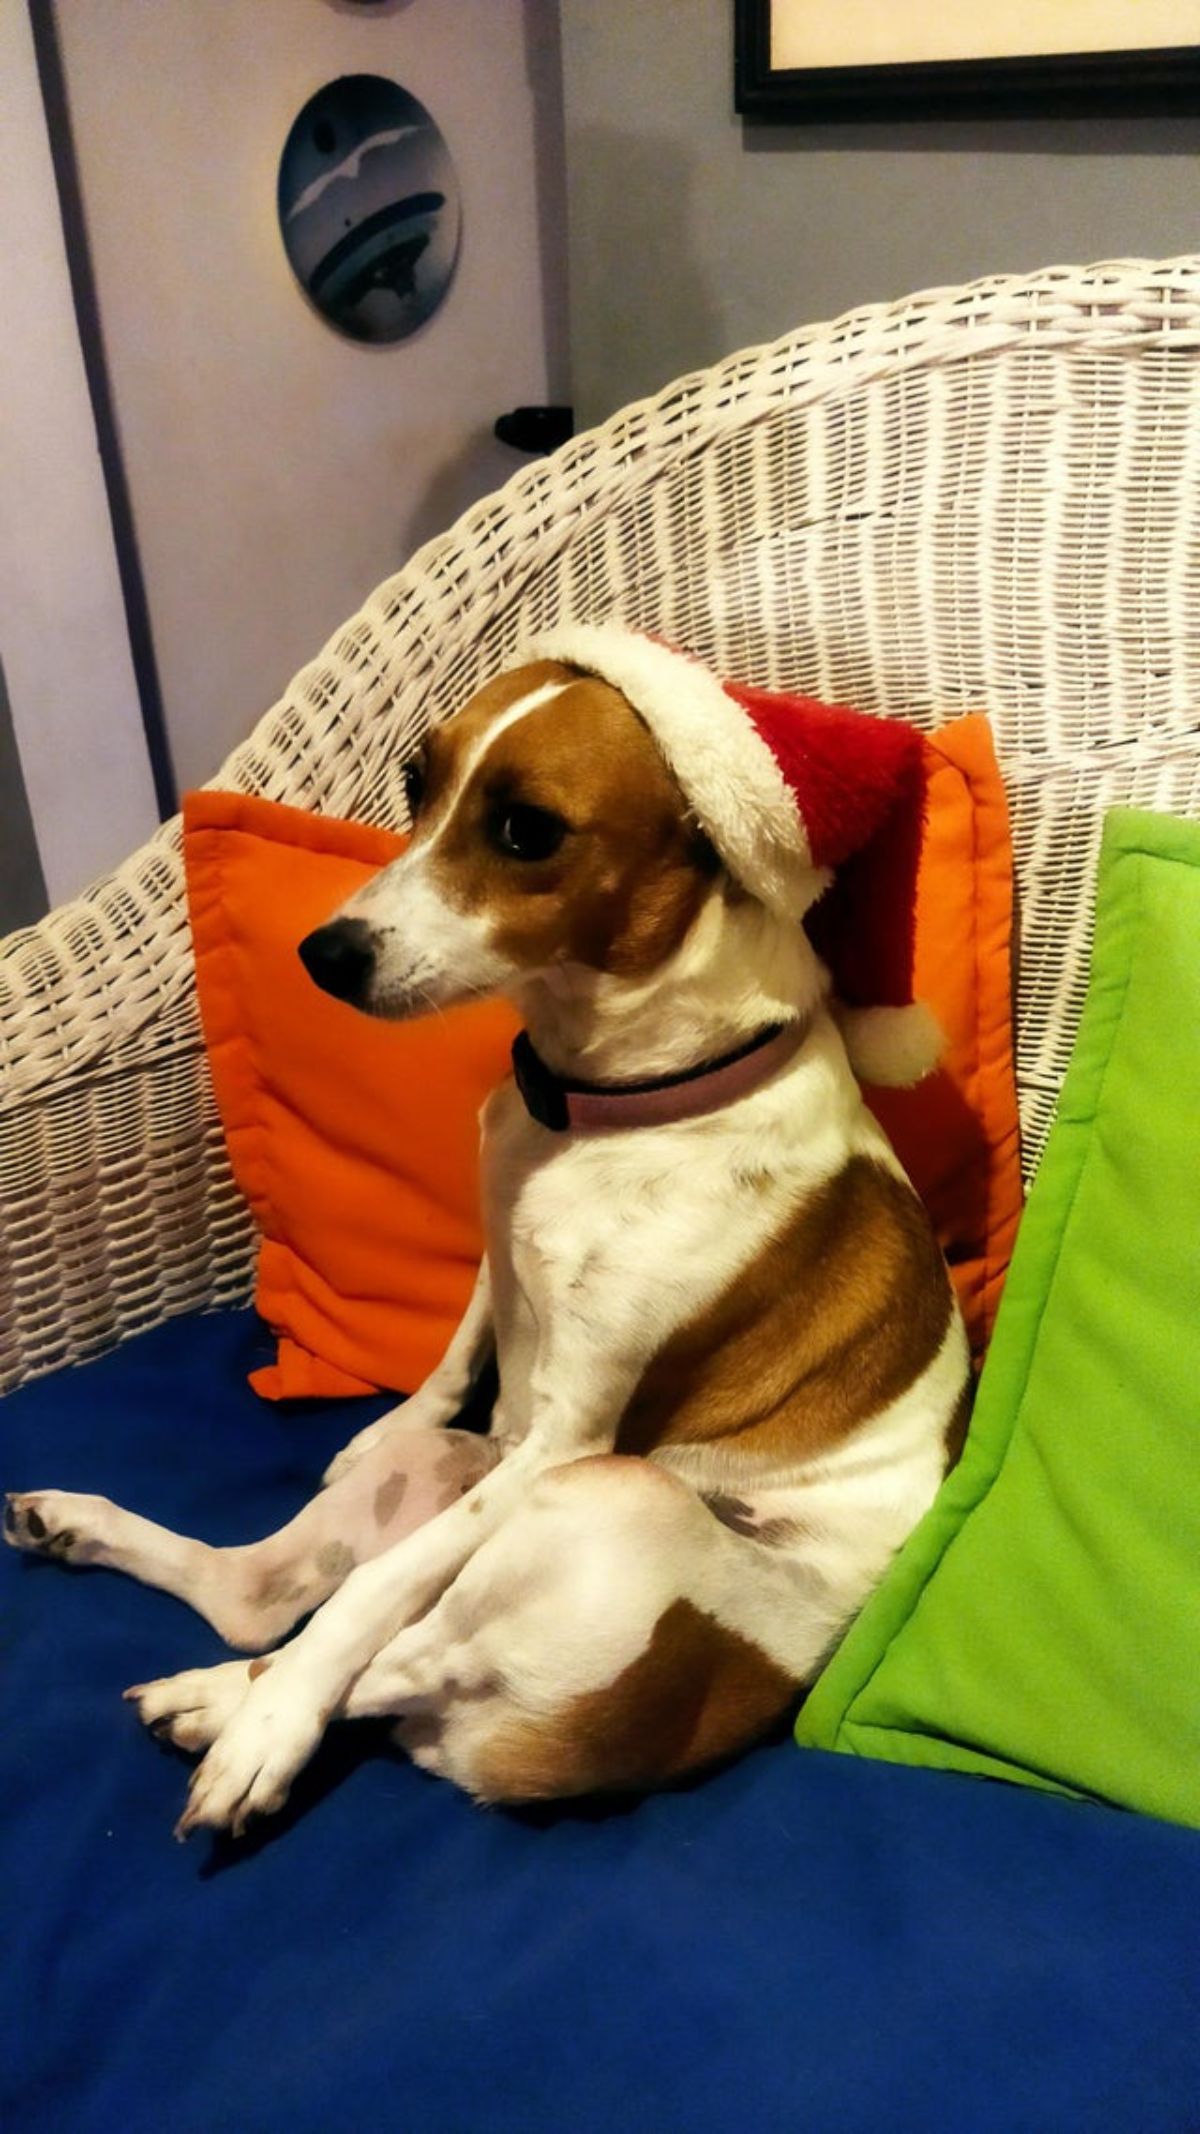 brown and white dog sitting upright wearing a red and white santa hat on a blue sofa cushon with 2 orange and green cushions behind it